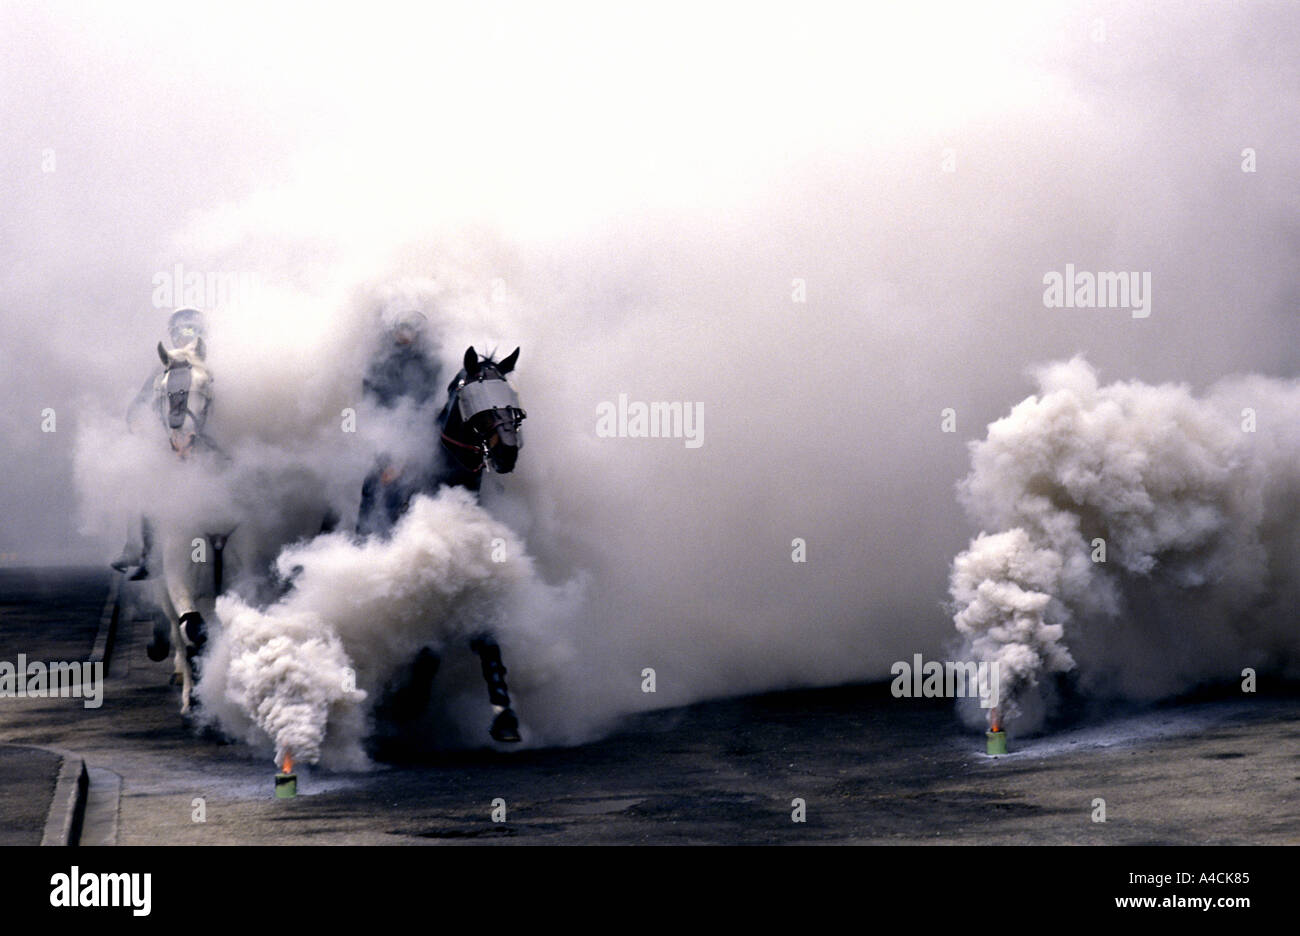 Mounted police ride their horses through smoke flares as part of riot control training Stock Photo